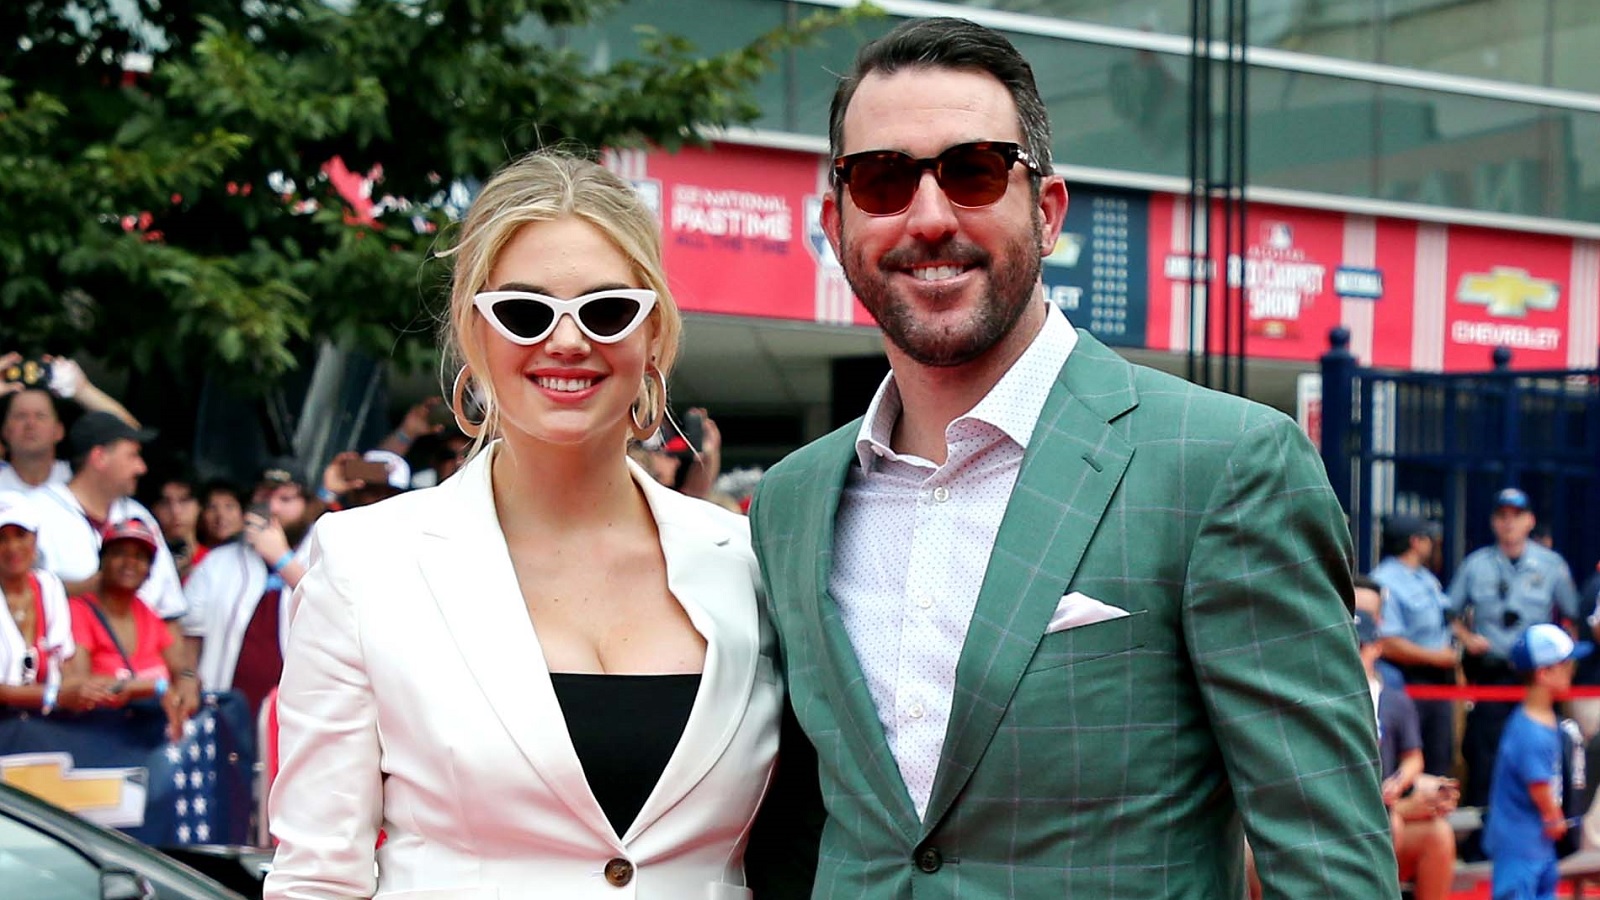 Kate Upton outshines Justin Verlander on Father's Day with her